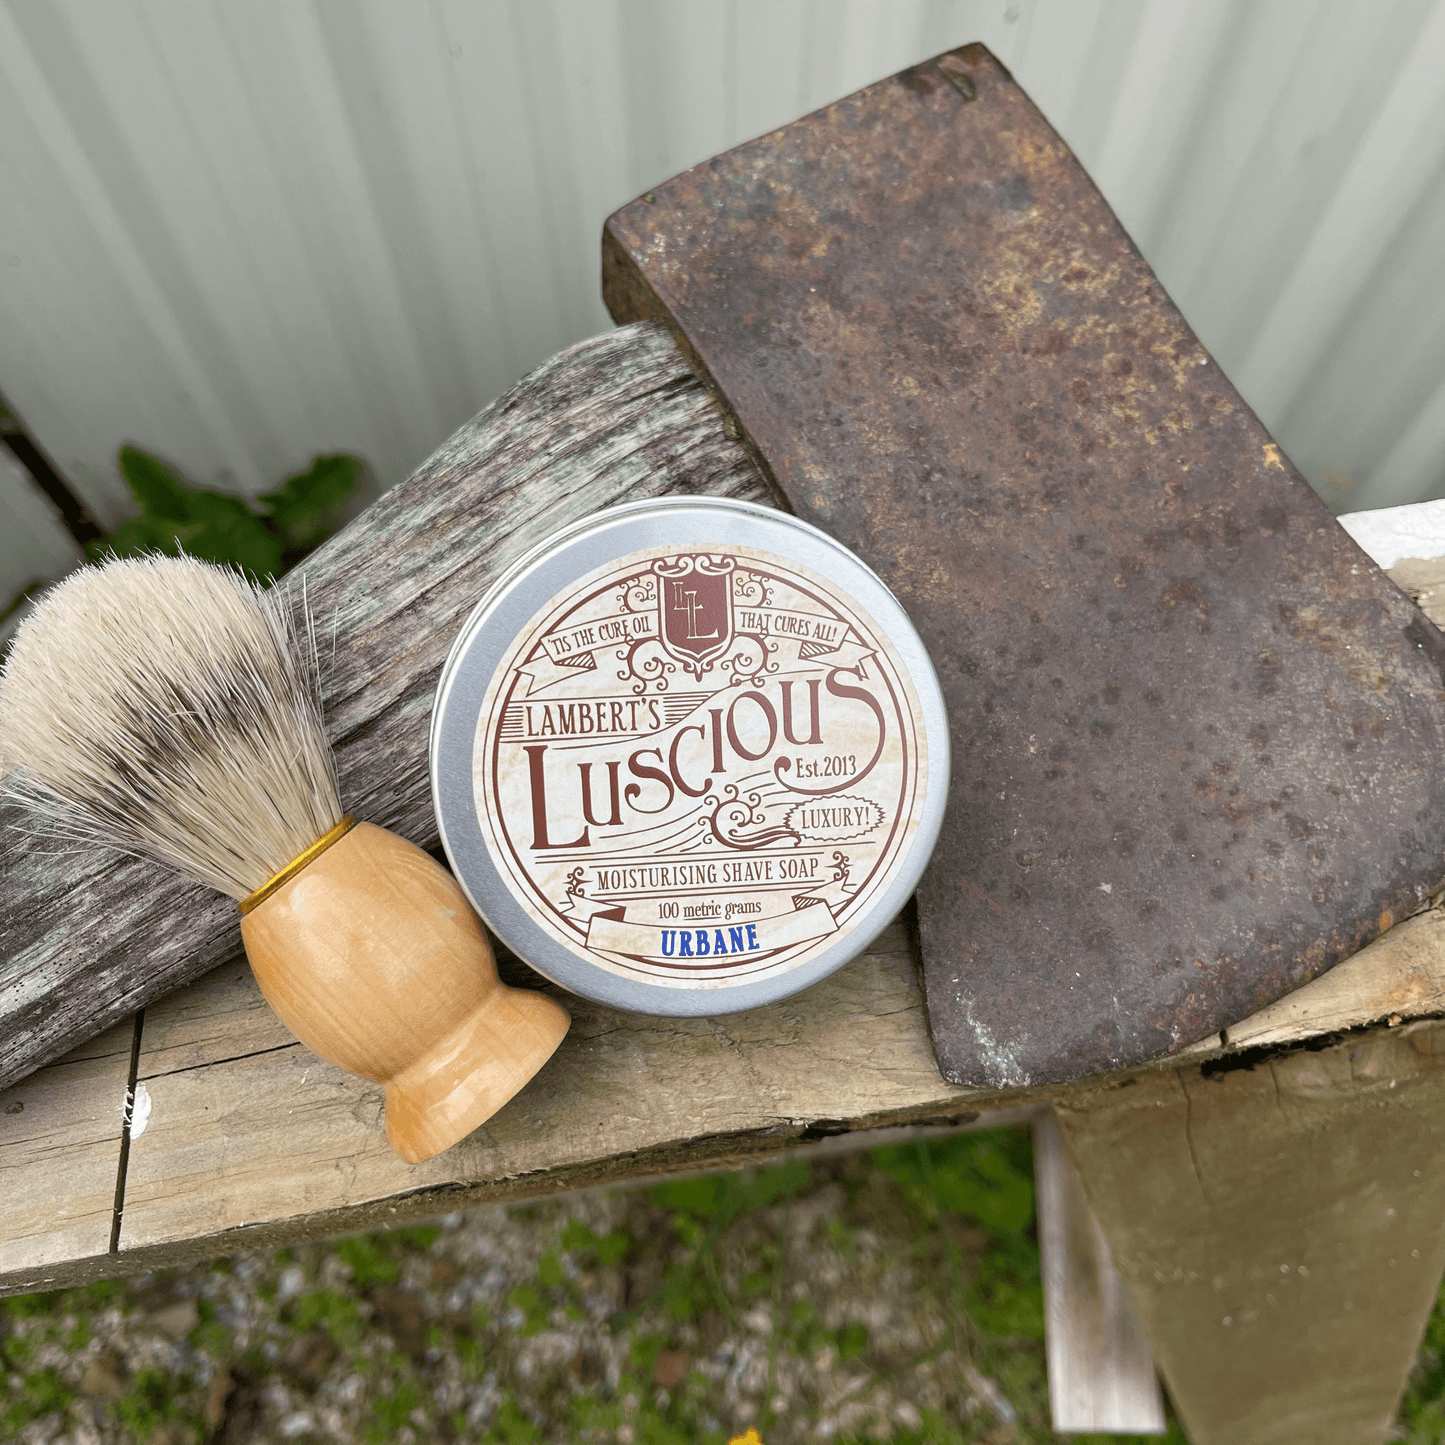  Metal tin of Lamberts Luscious mens shaving soap and a boar bristle shaving brush sitting next to an axe.